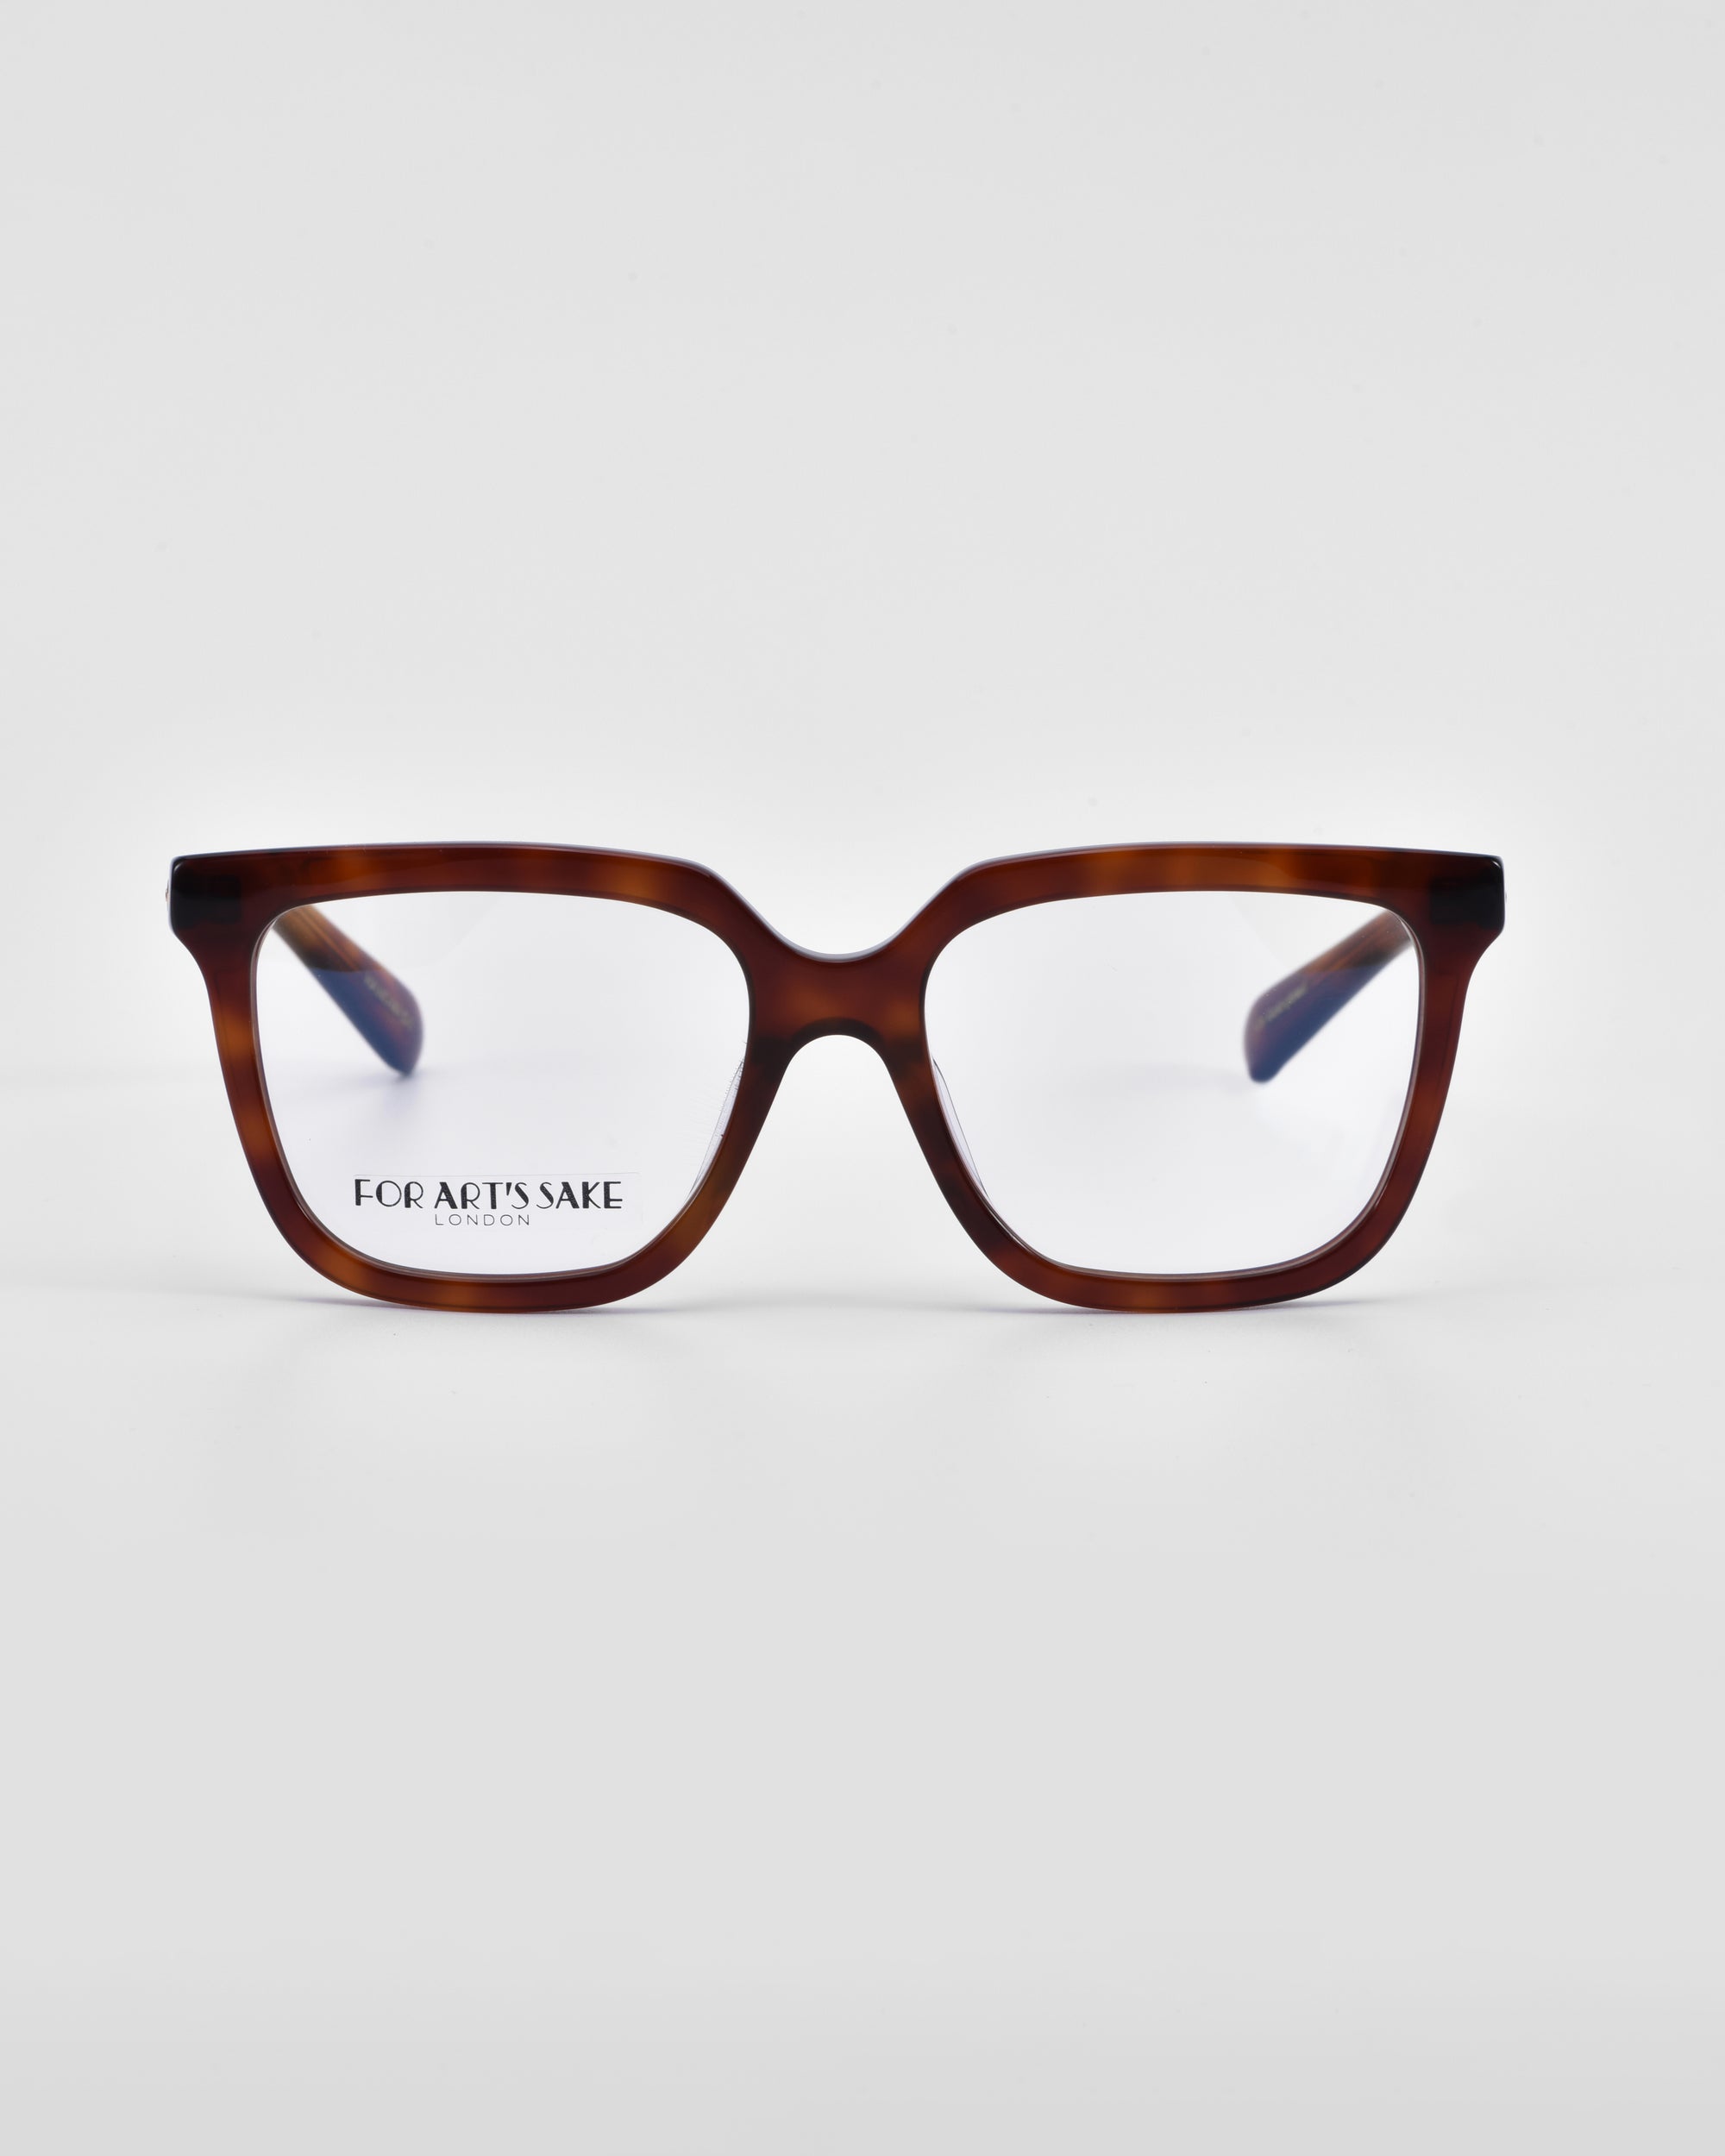 A pair of tortoiseshell eyeglasses with a classic square silhouette on a plain white background. The glasses have clear lenses, and the brand name &quot;For Art&#39;s Sake®&quot; is visible on the left lens, offering an elegant option for those seeking a prescription service. The product name is Nina.